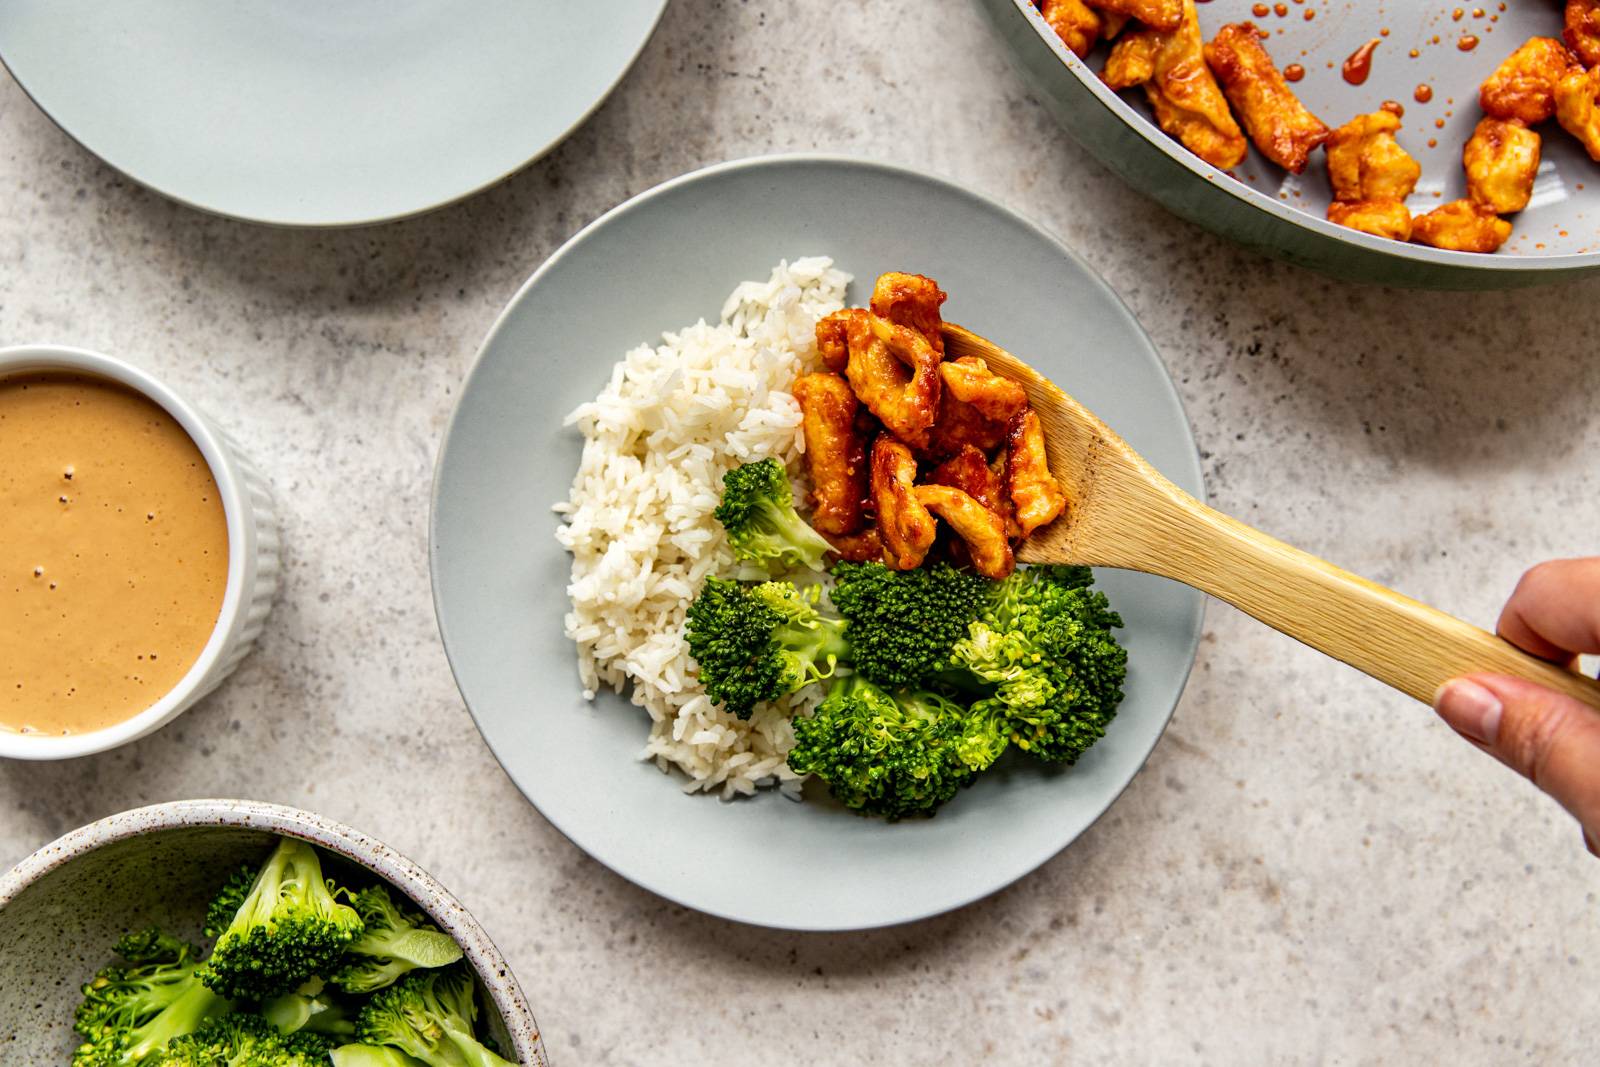 Red chicken curry is added to a plate with broccoli and cooked rice